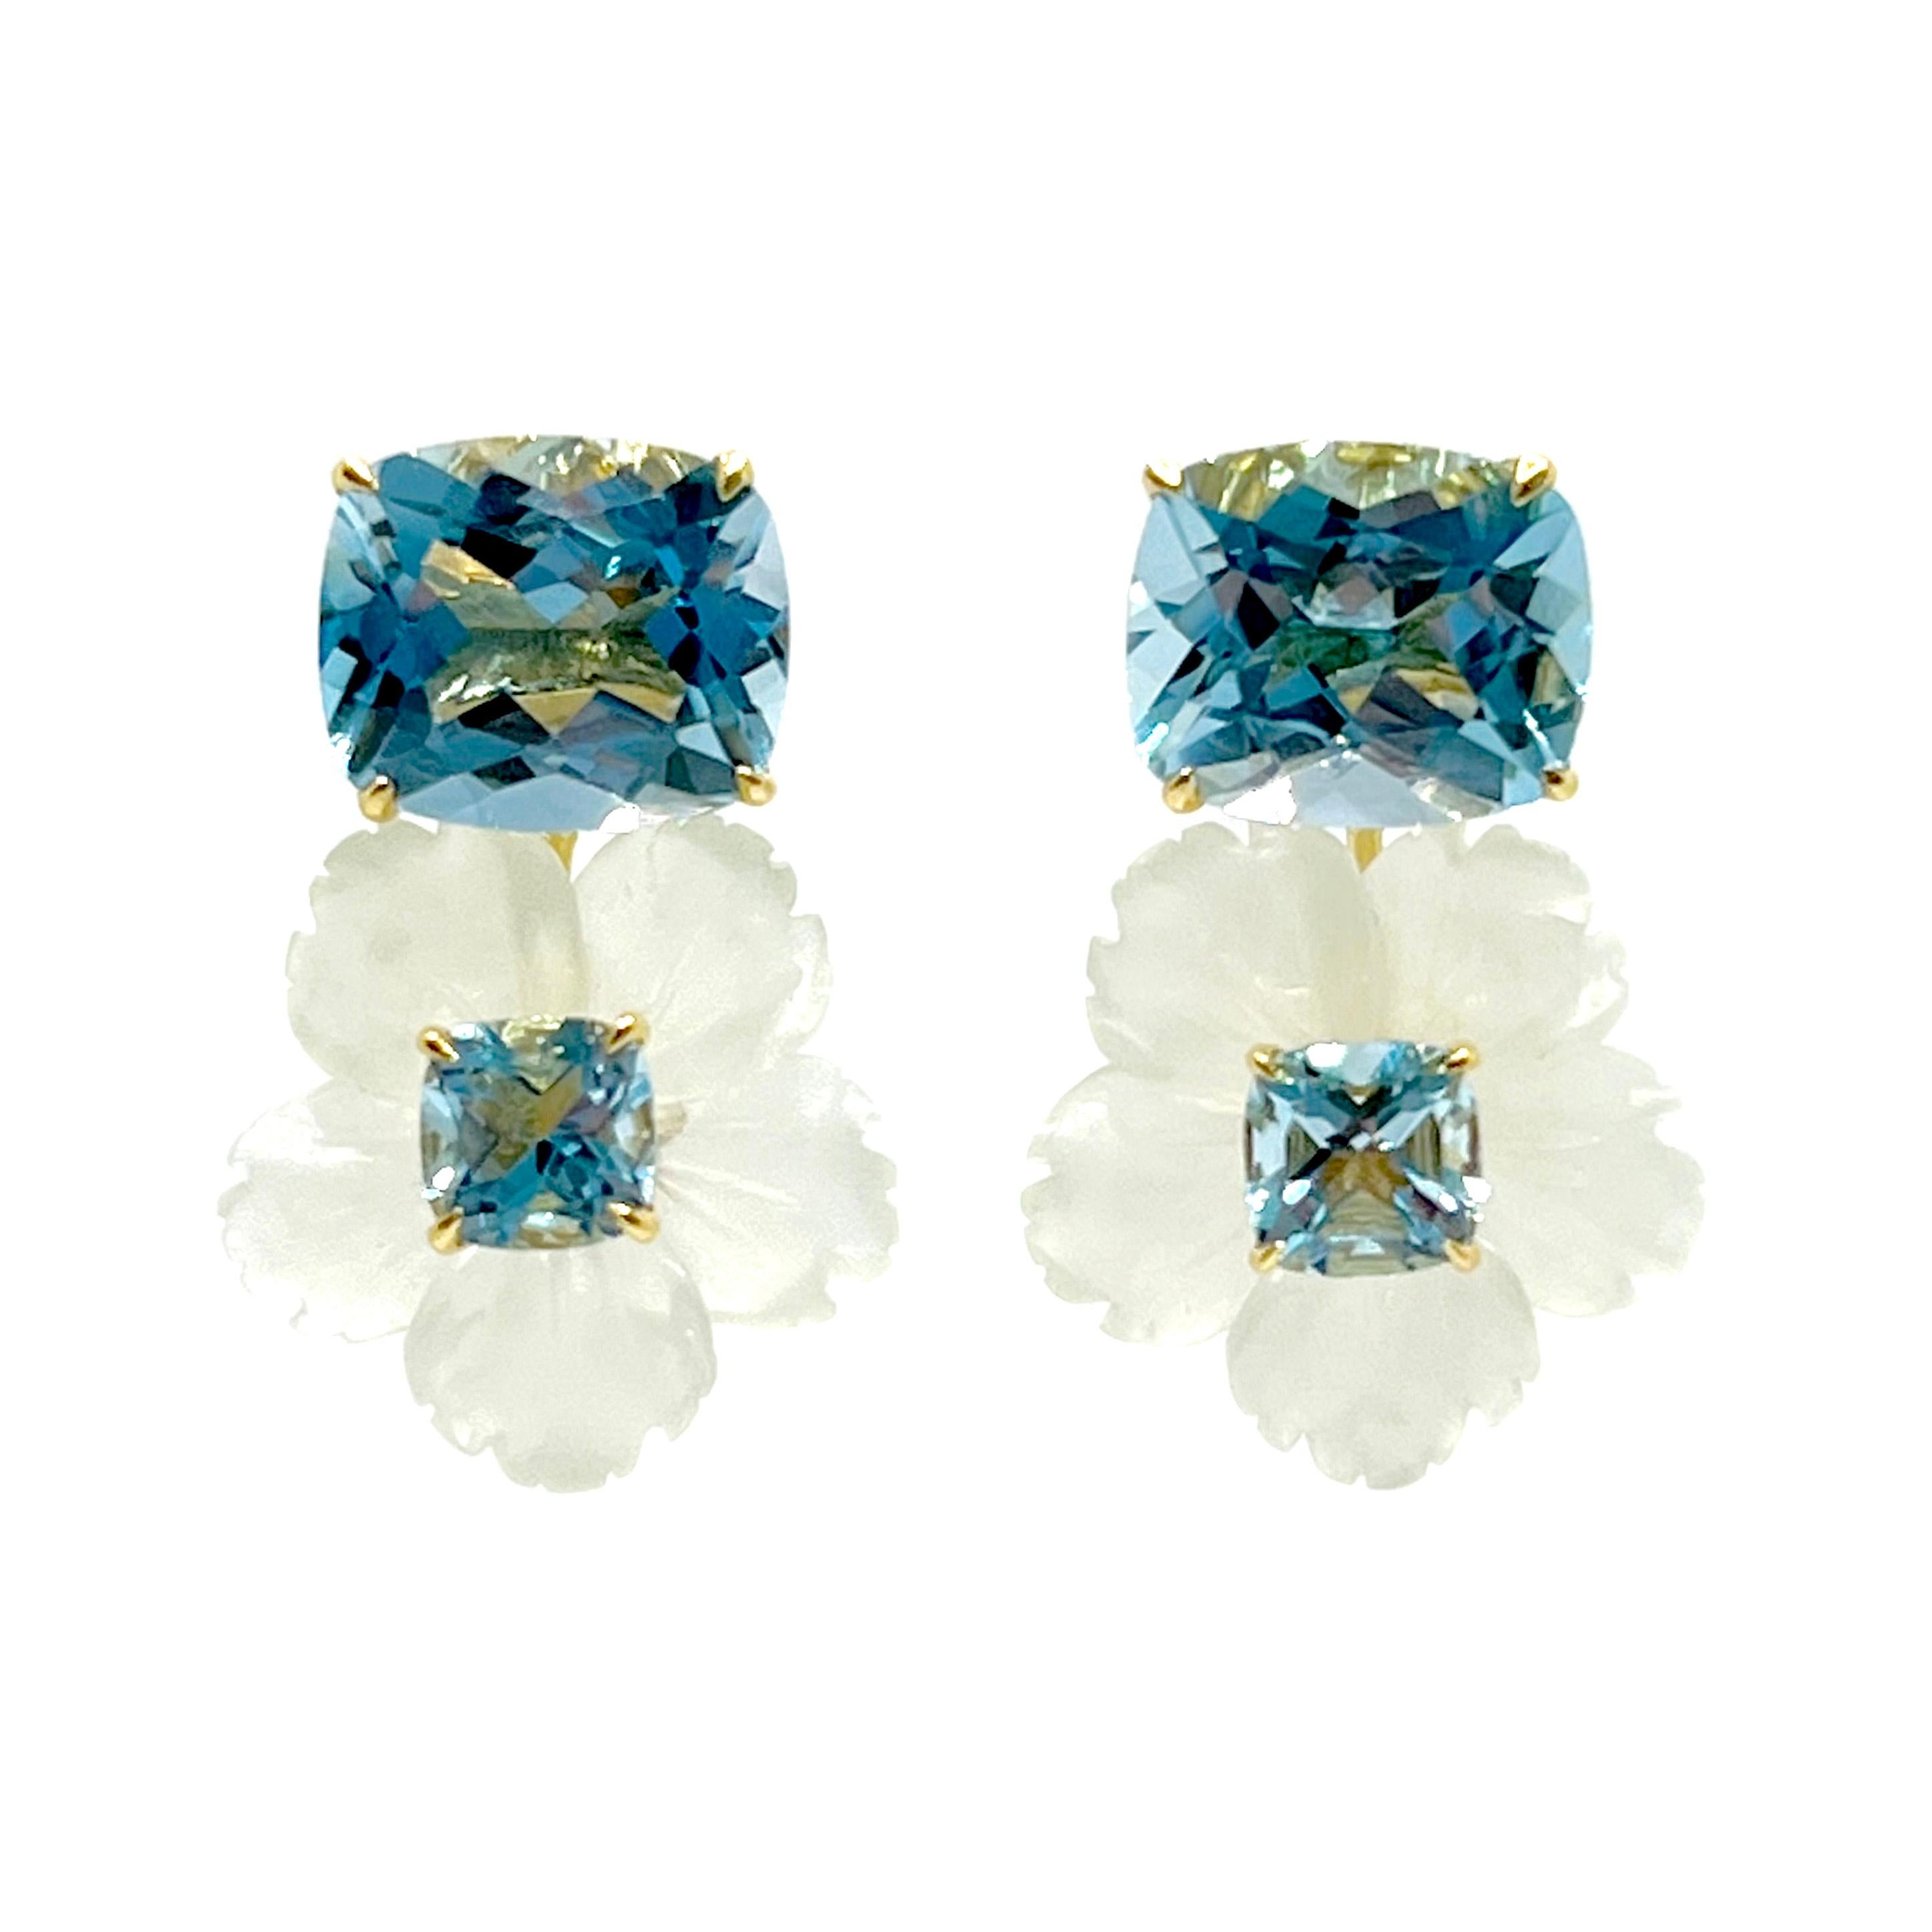 Bijoux Num's Cushion-cut Blue Topaz and Carved Blue Serpentine Flower Drop Earrings

This gorgeous pair of earrings features beautiful cushion-cut sky blue topaz,  18mm pastel-green serpentine carved into beautiful three dimension flower with